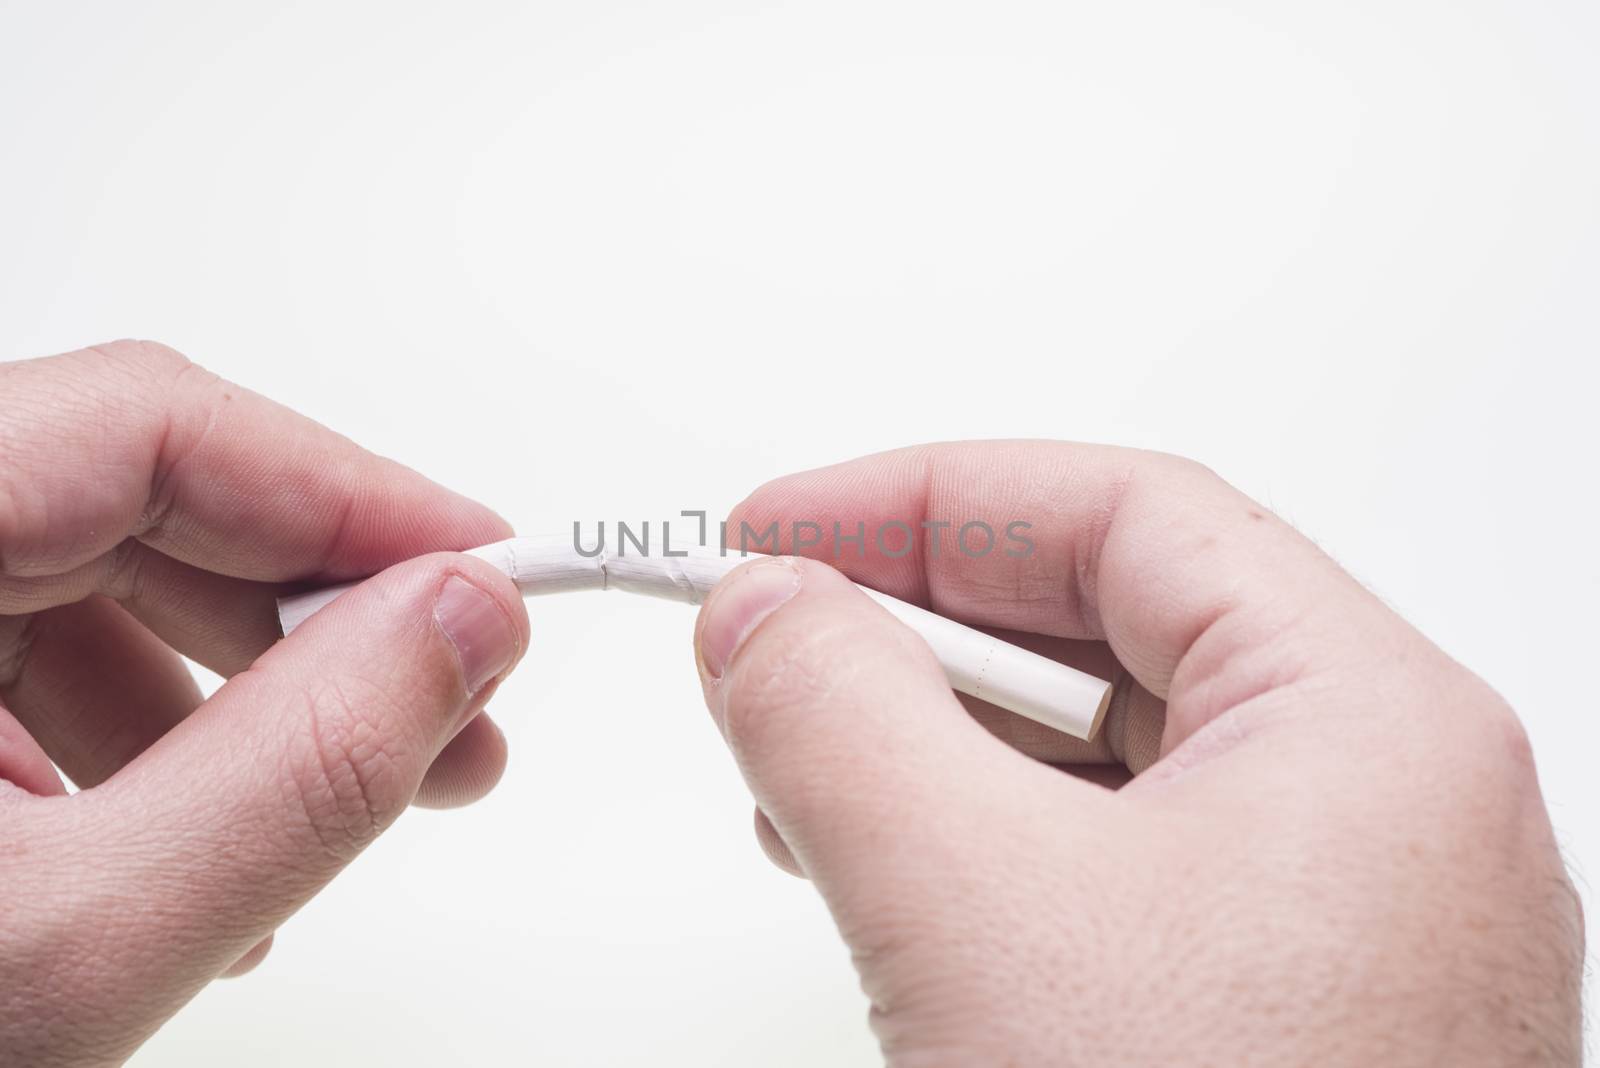 Isolated hands broke a cigarette on white background